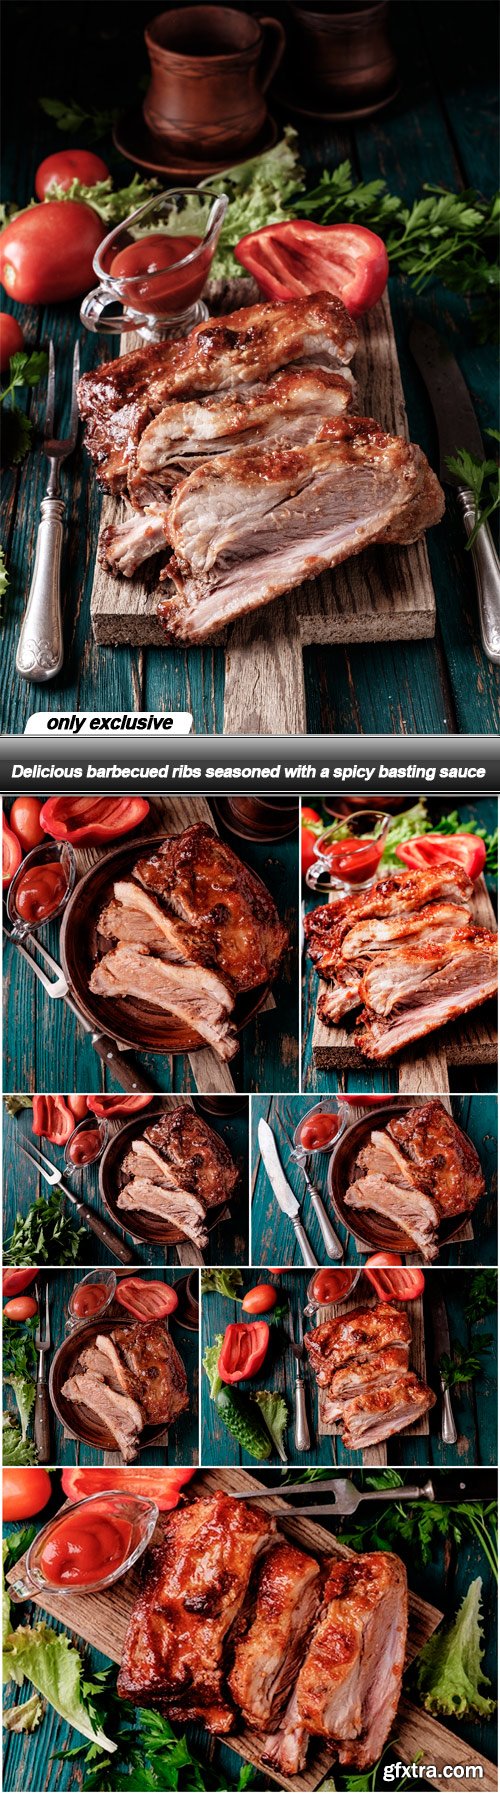 Delicious barbecued ribs seasoned with a spicy basting sauce - 8 UHQ JPEG